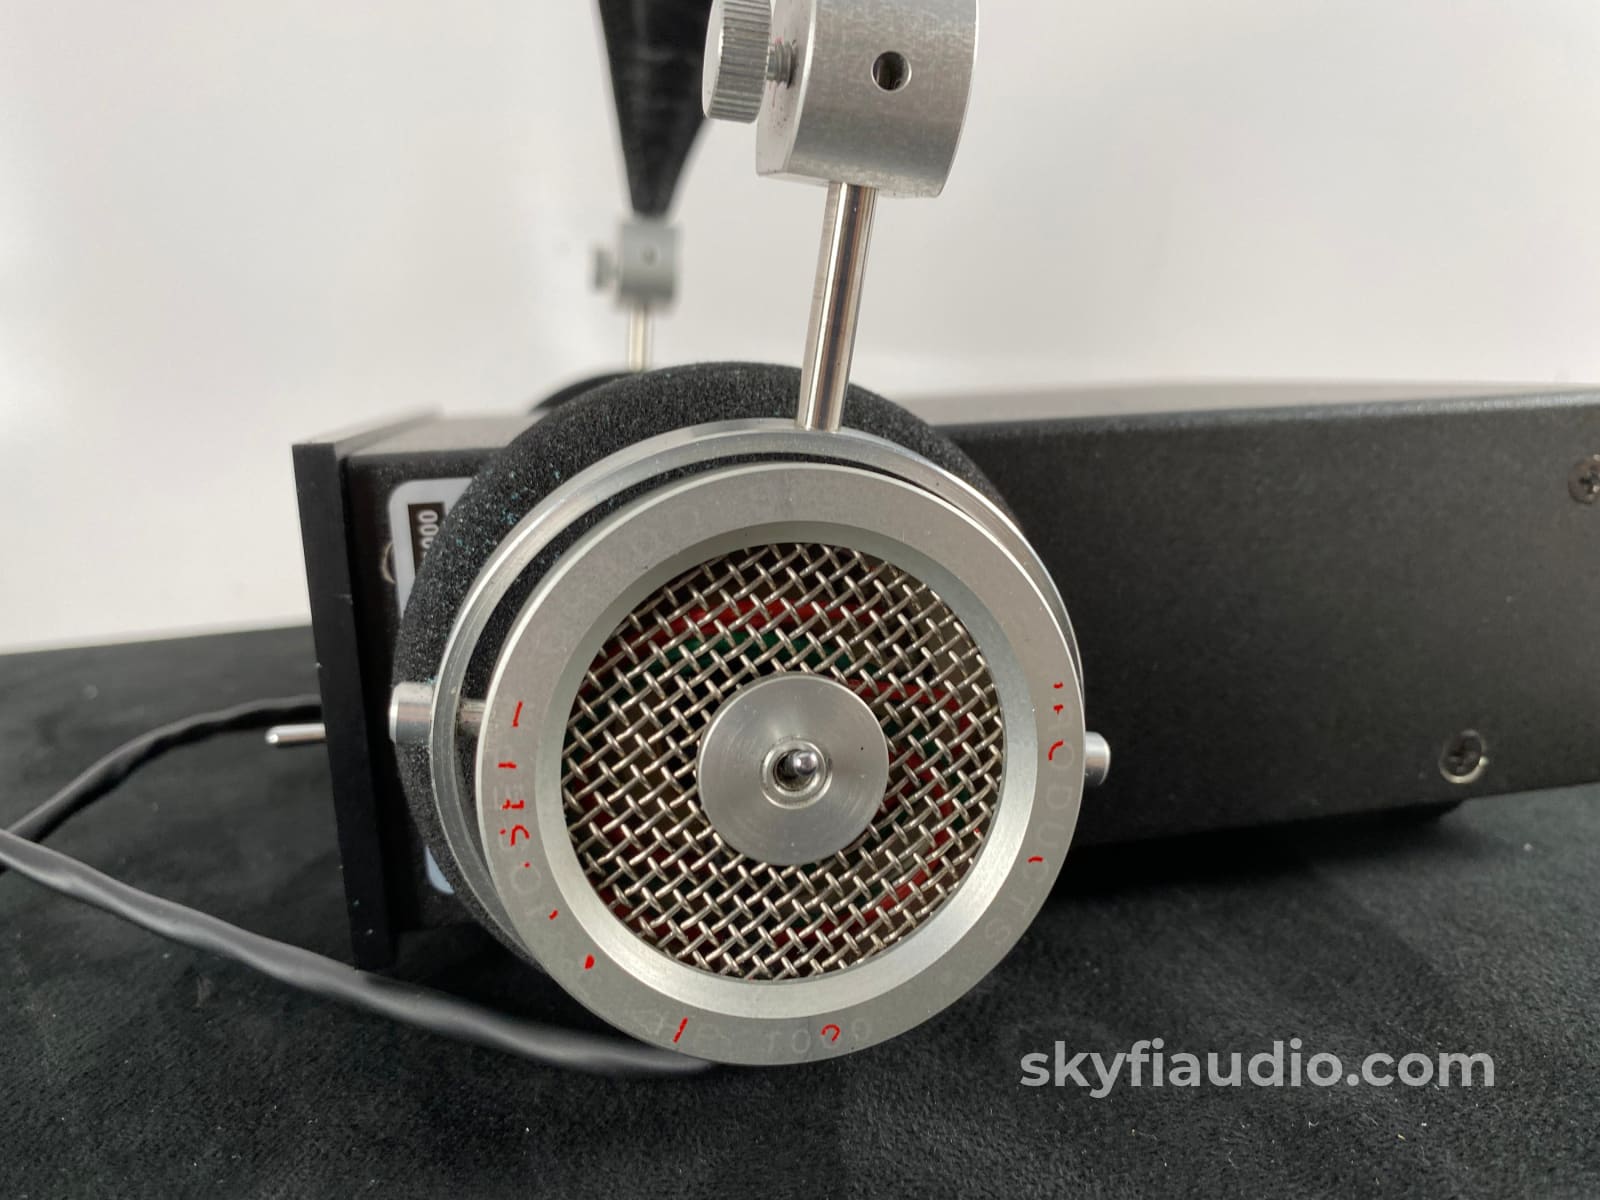 Grado Hp-1 (Hp-1000 Series) Rare And Legendary Vintage Headphones With Hpa-1 Battery Powered